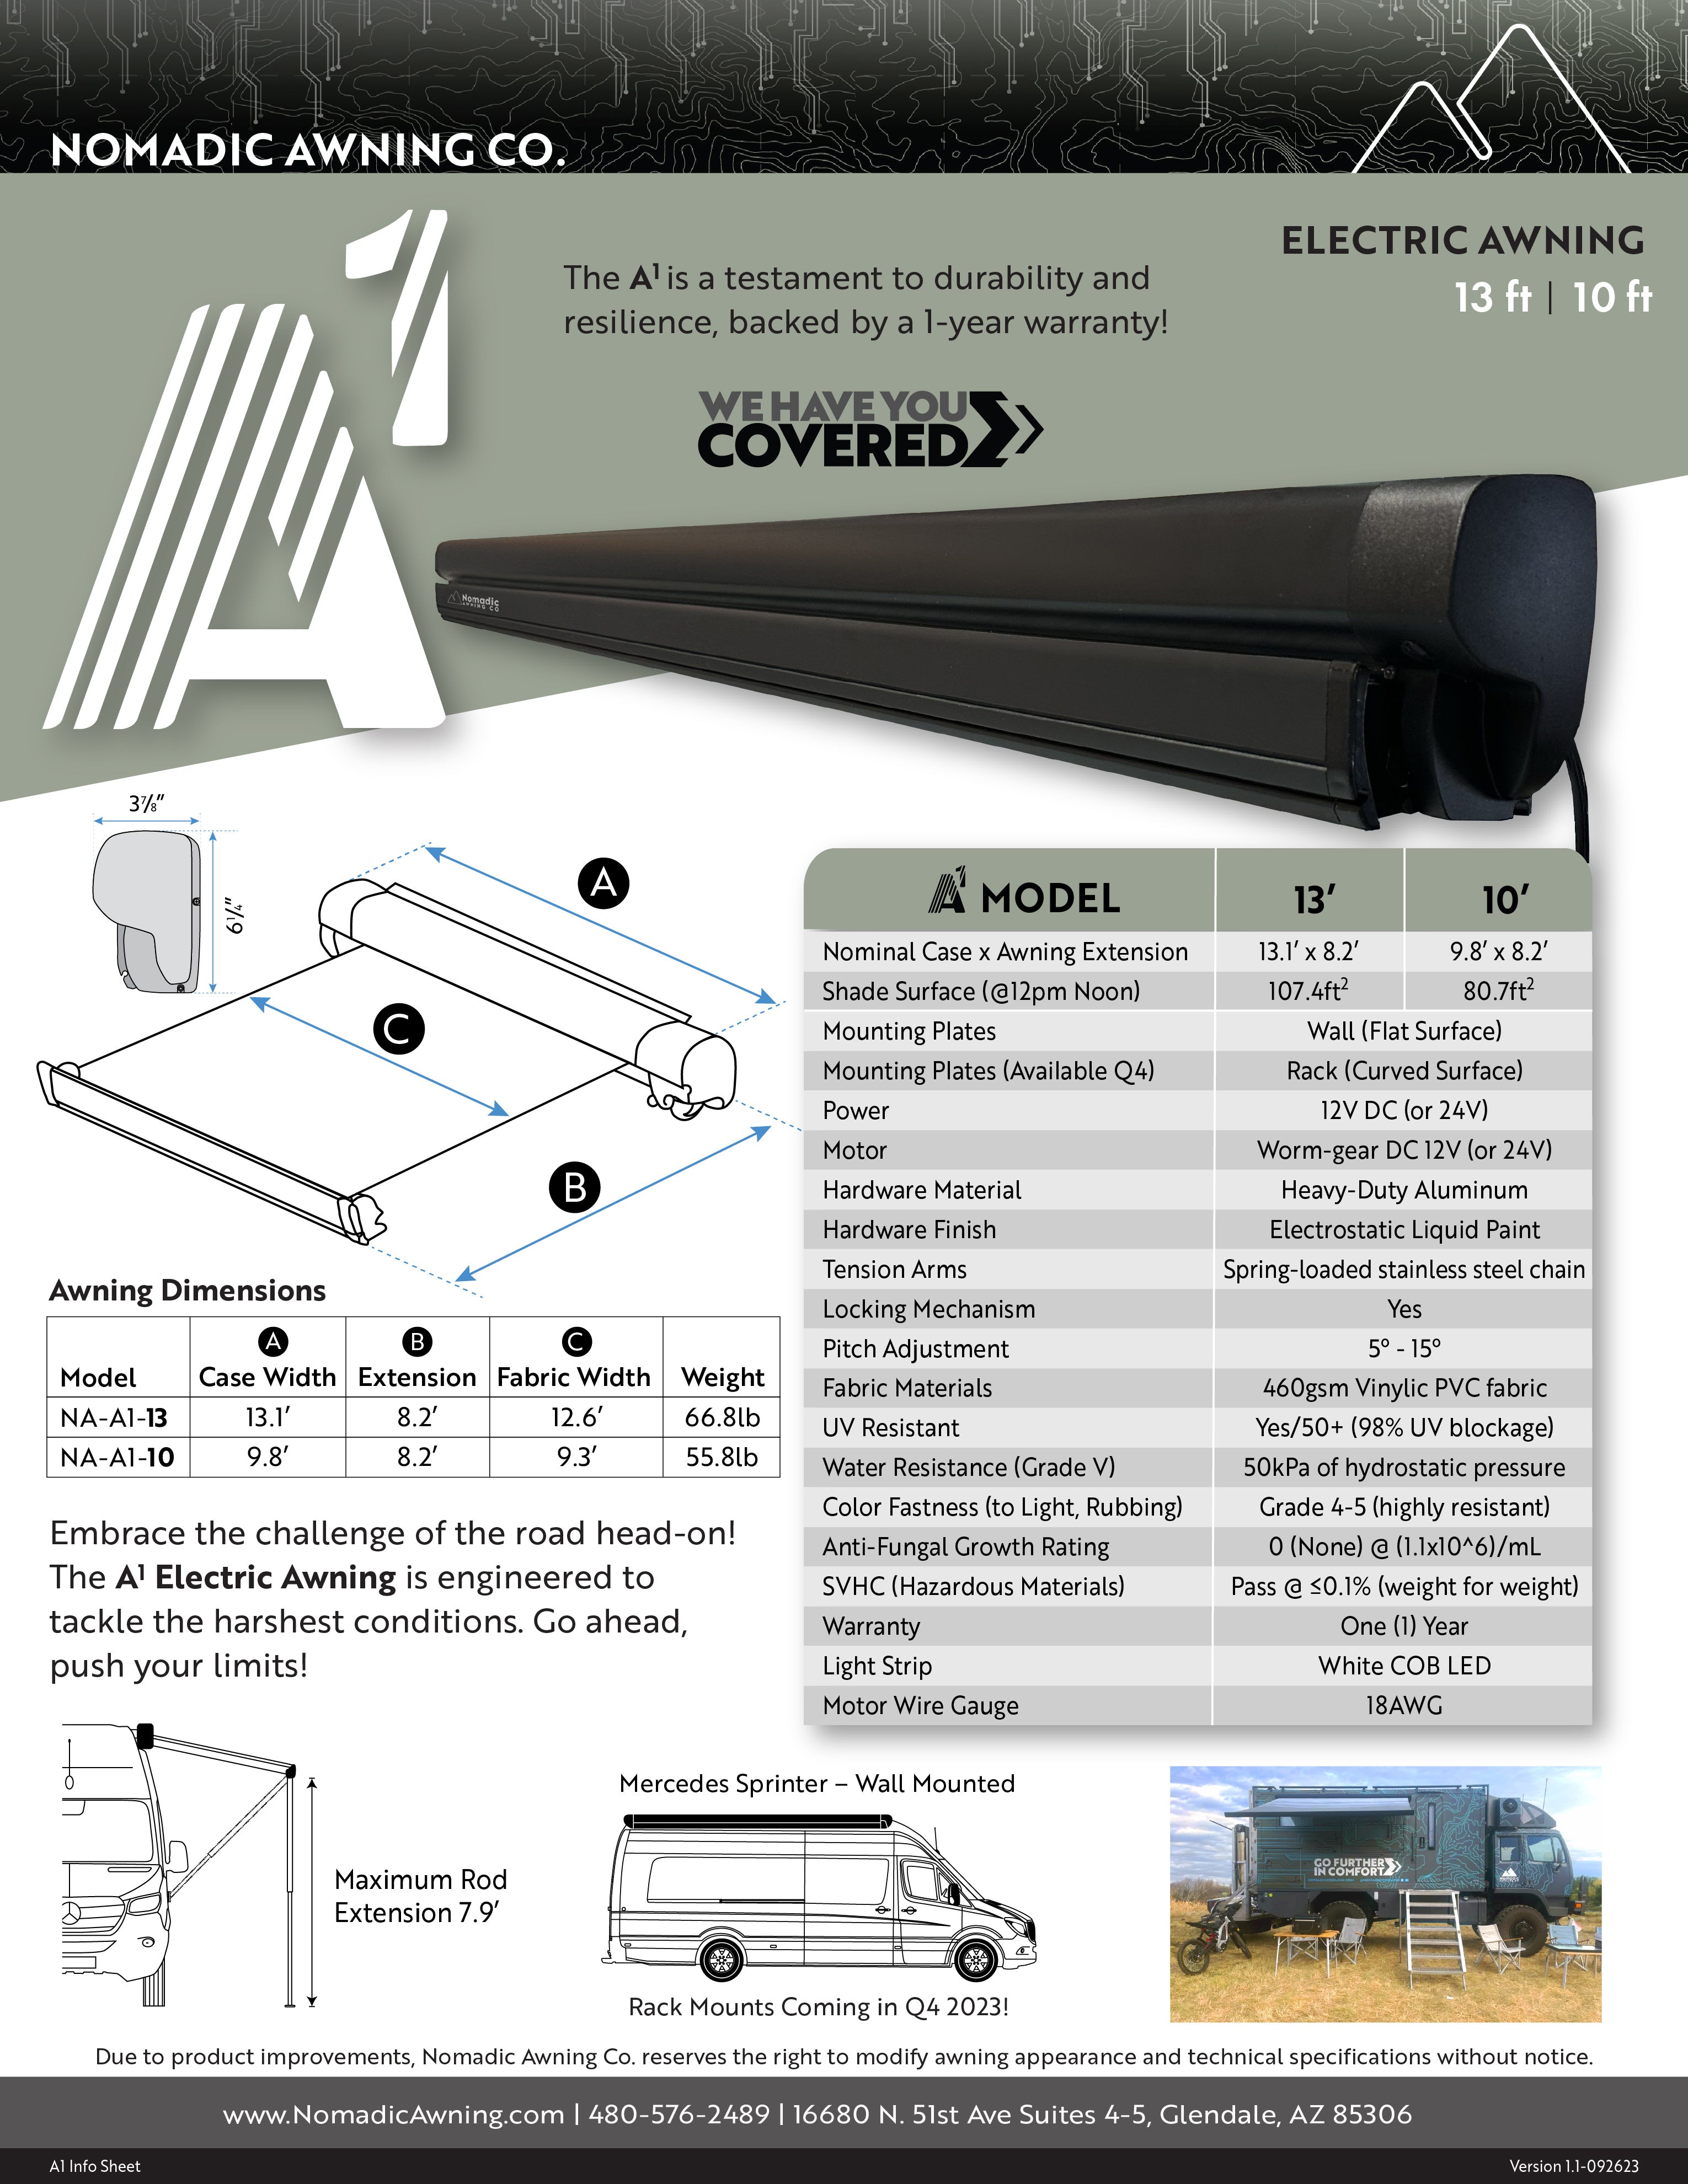 The A1 Electric Awning Info Sheet - everything you want to know! (2 of 2)